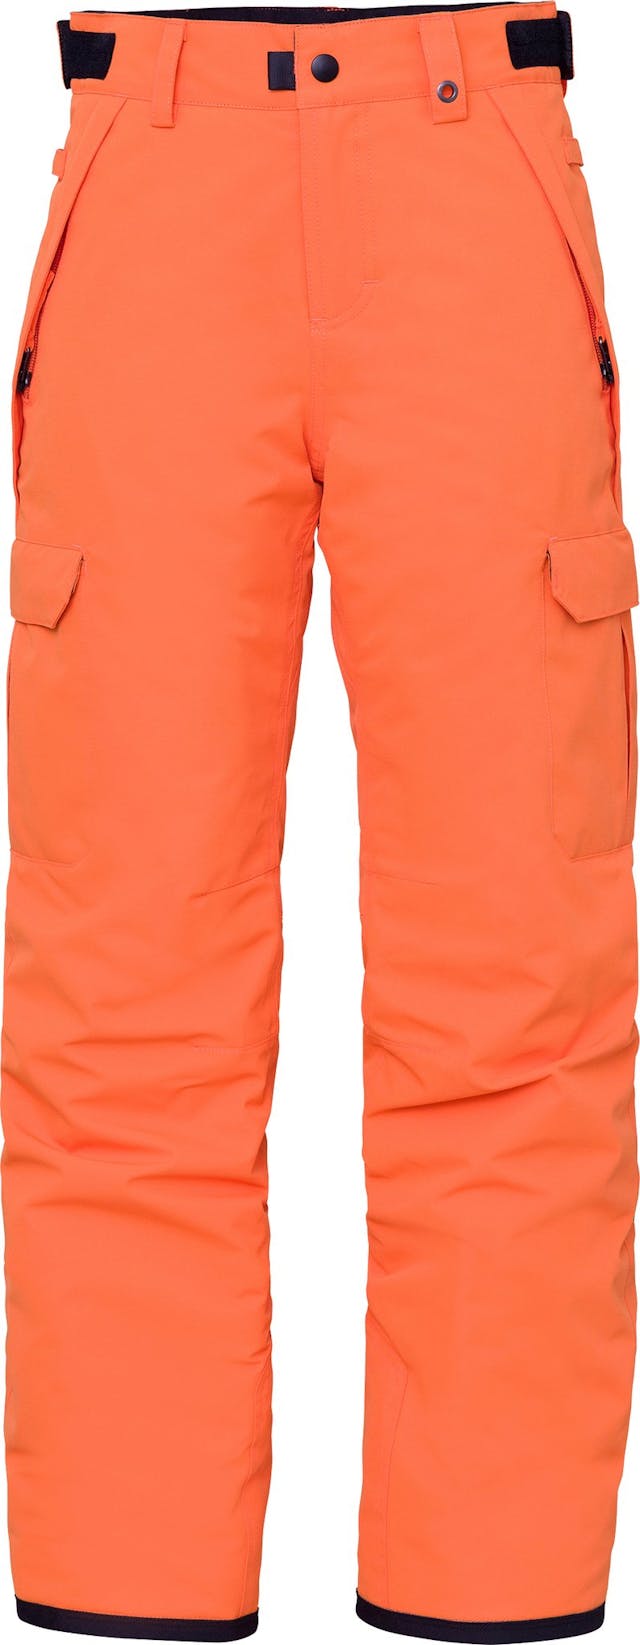 Product image for Infinity Cargo Insulated Pant - Boy